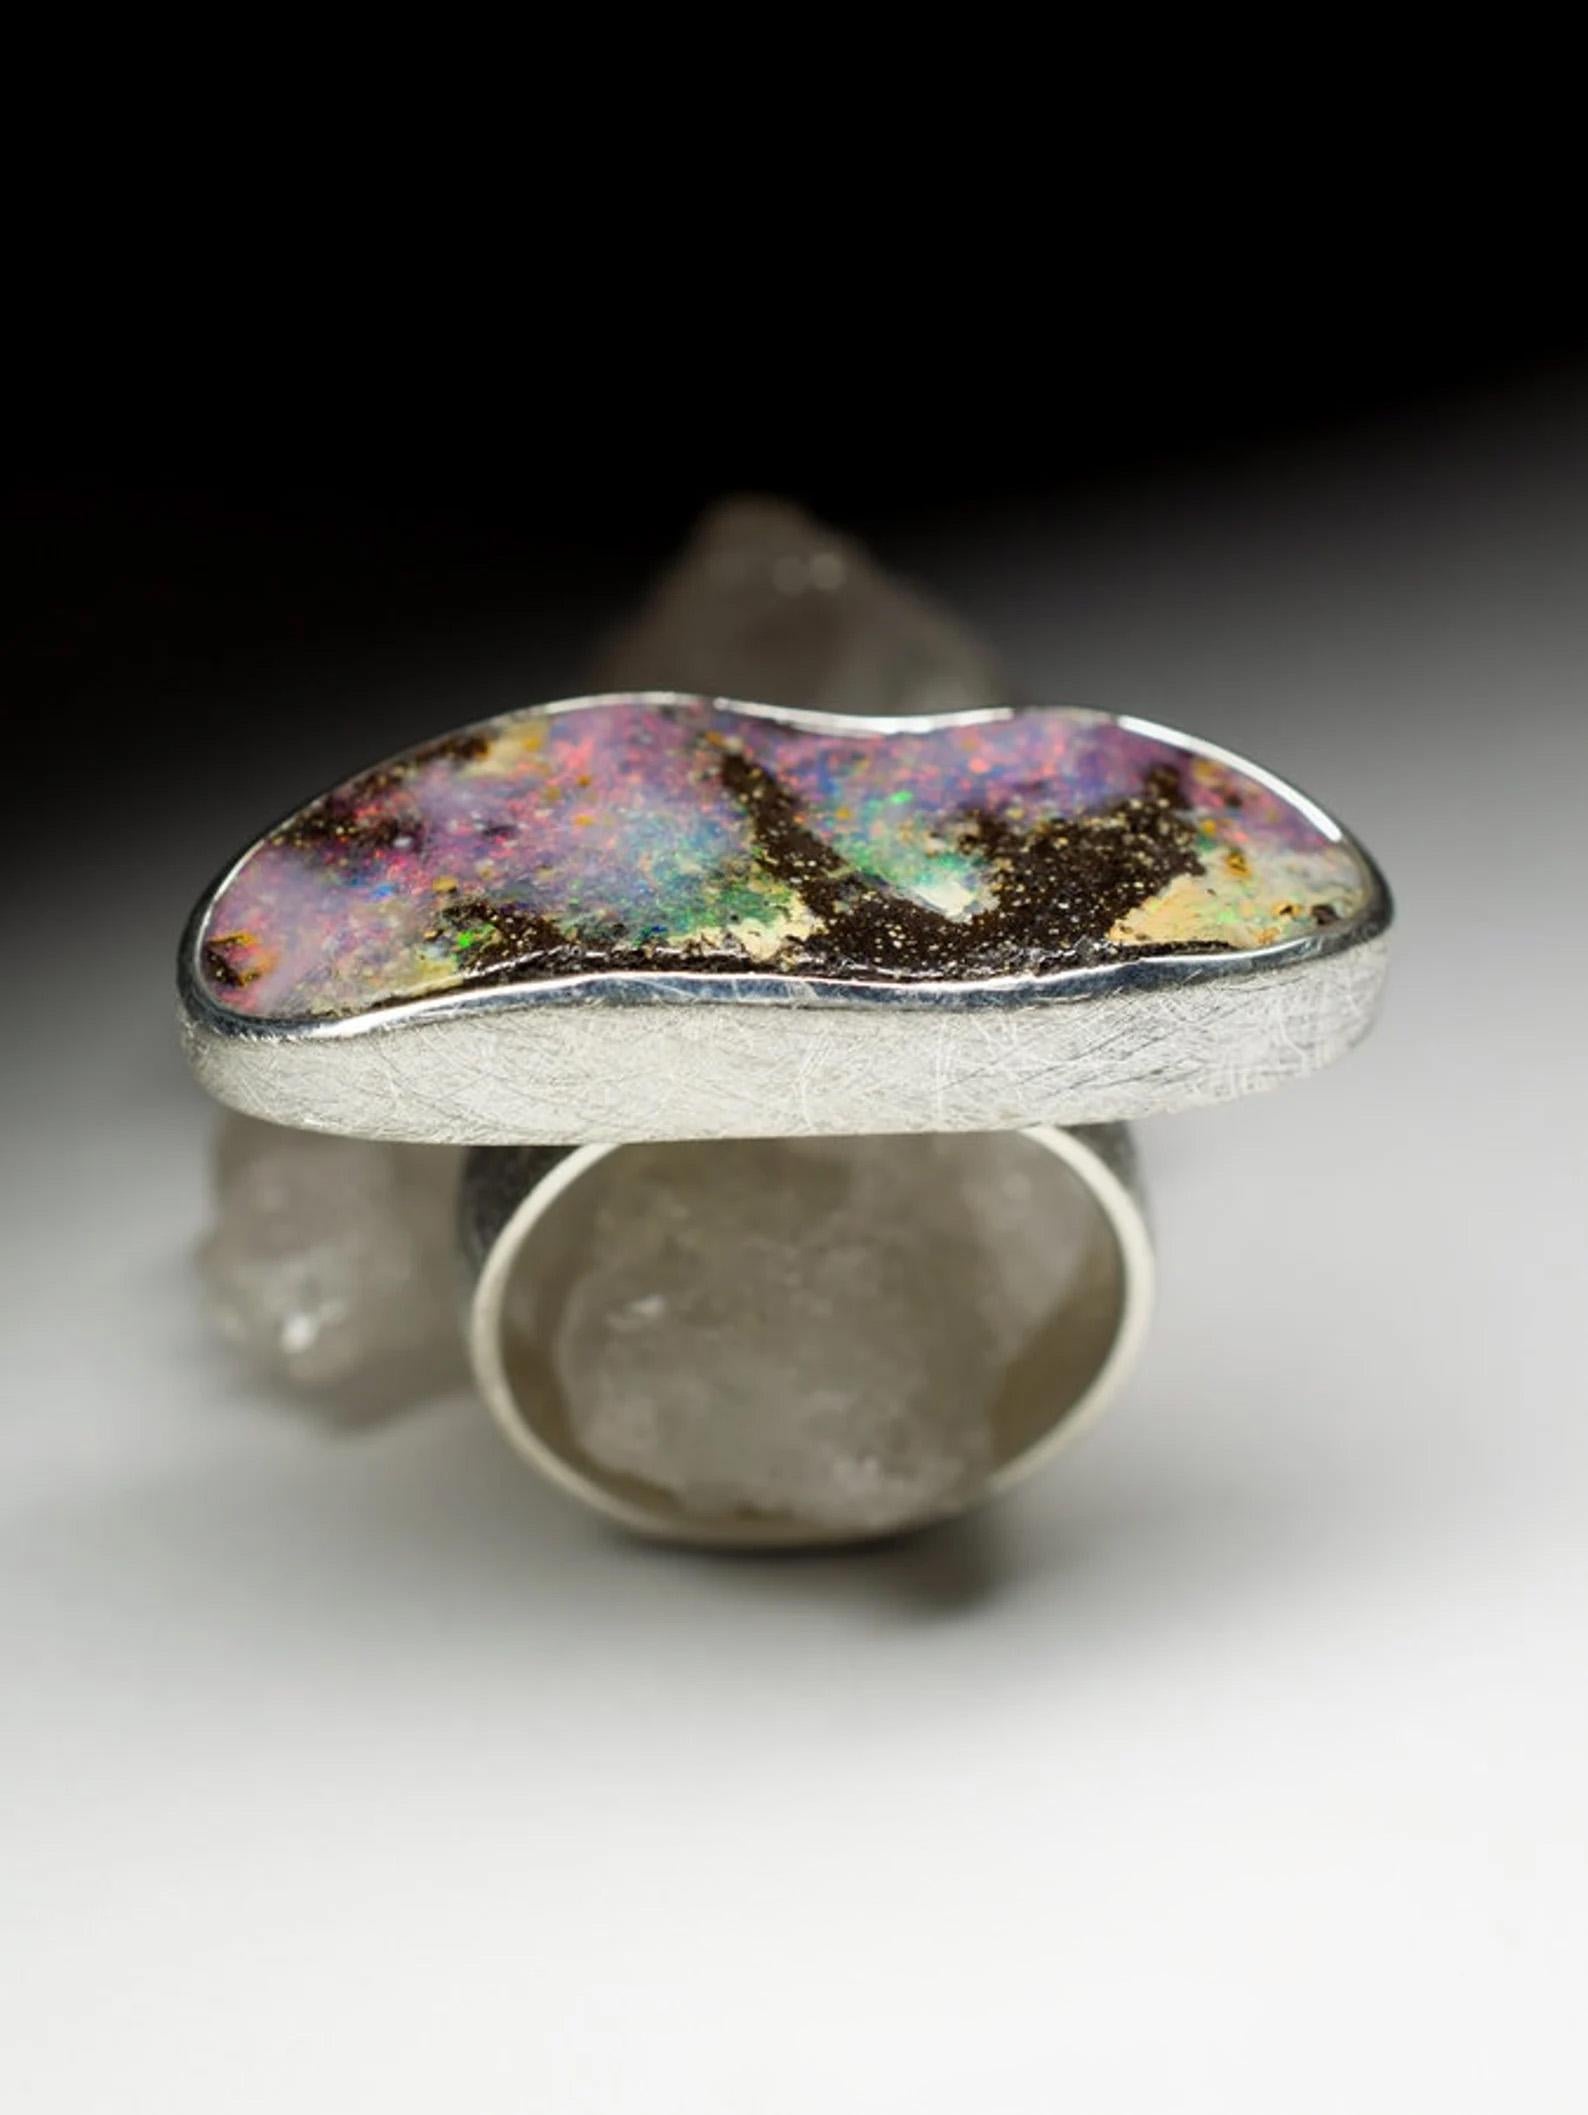 Matte finish silver ring with natural Boulder Opal
opal origin - Australia
weight of the opal - 18.2 carat
weight of the ring - 10.53 grams
ring size - 7 1/4 US / 55 EU
opal measures - 0.24 х 0.47 x 1.26 in / 6 x 12 x 32 mm